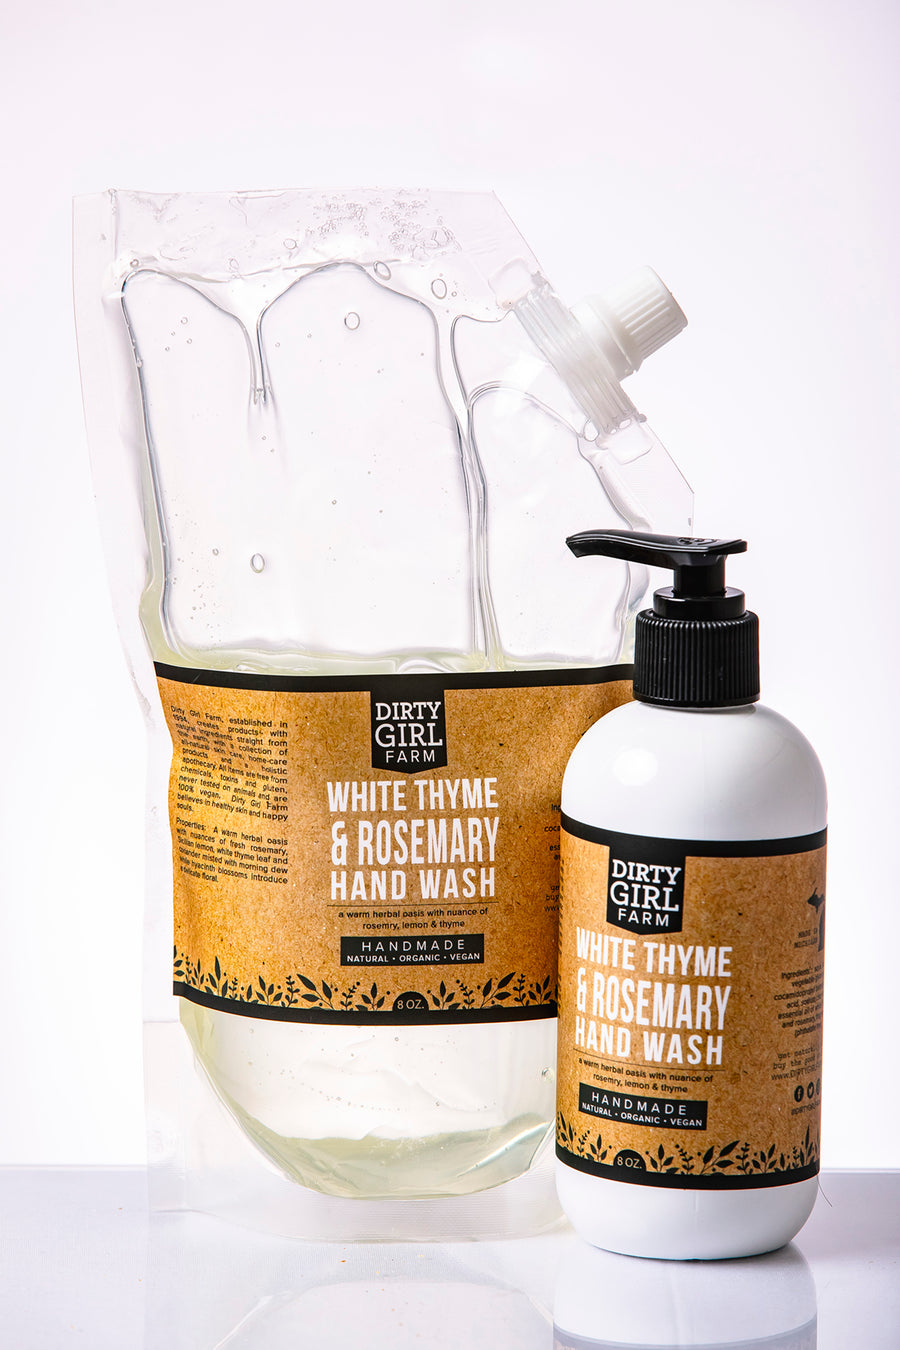 White Thyme and Rosemary Hand Wash